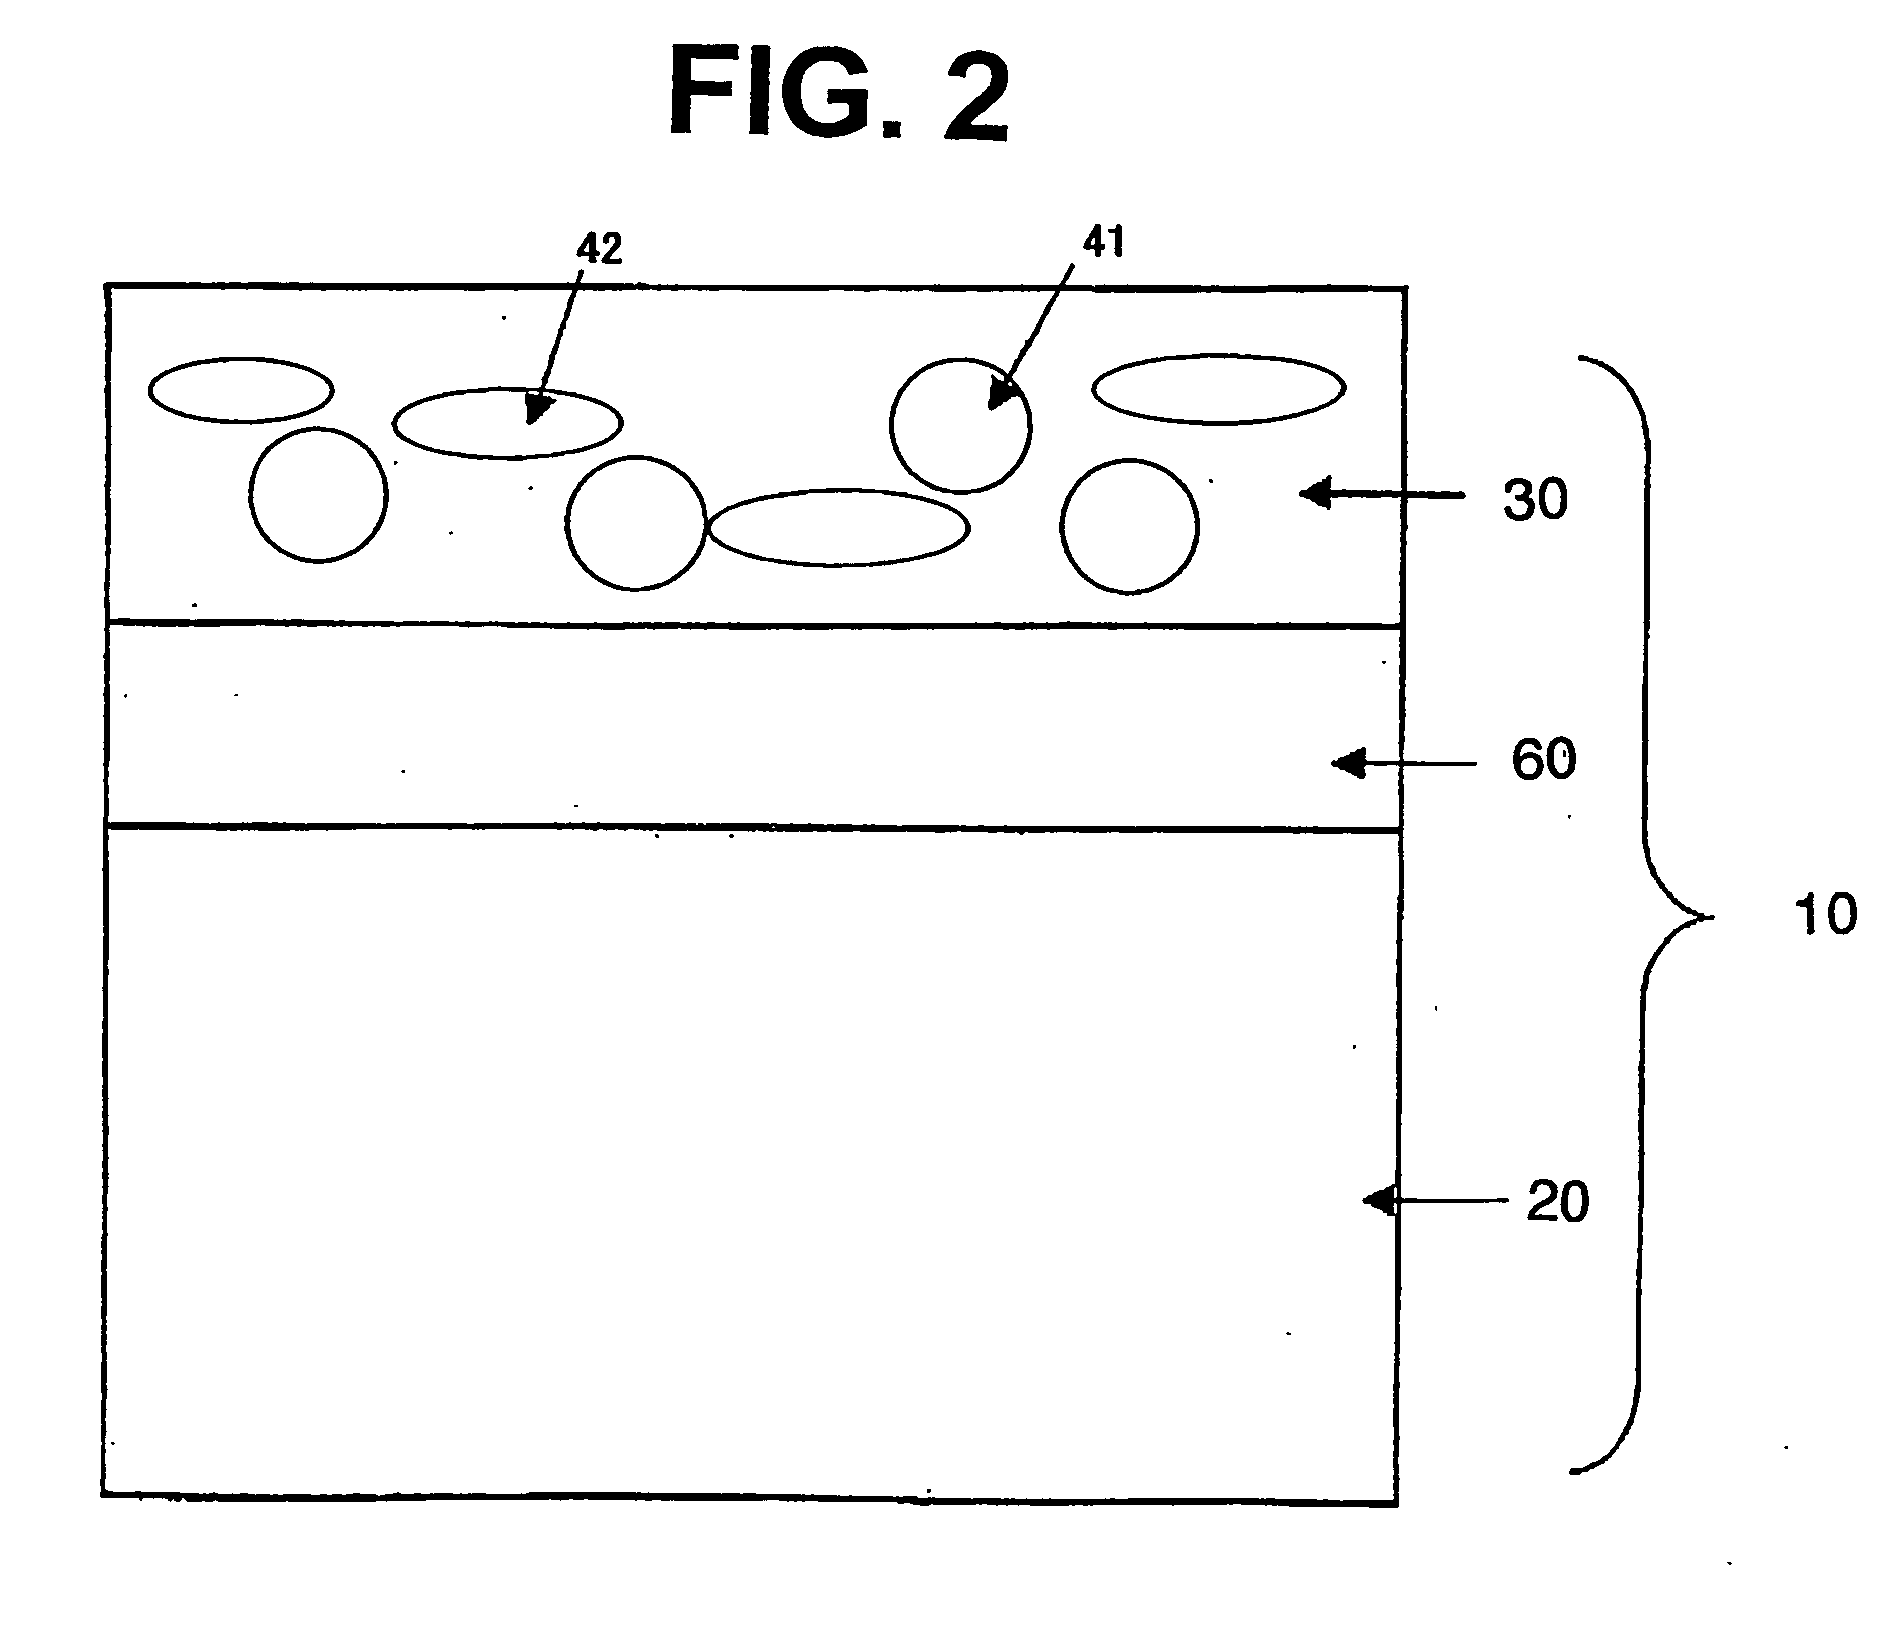 Diffusion film comprising transparent substrate and diffusion layer